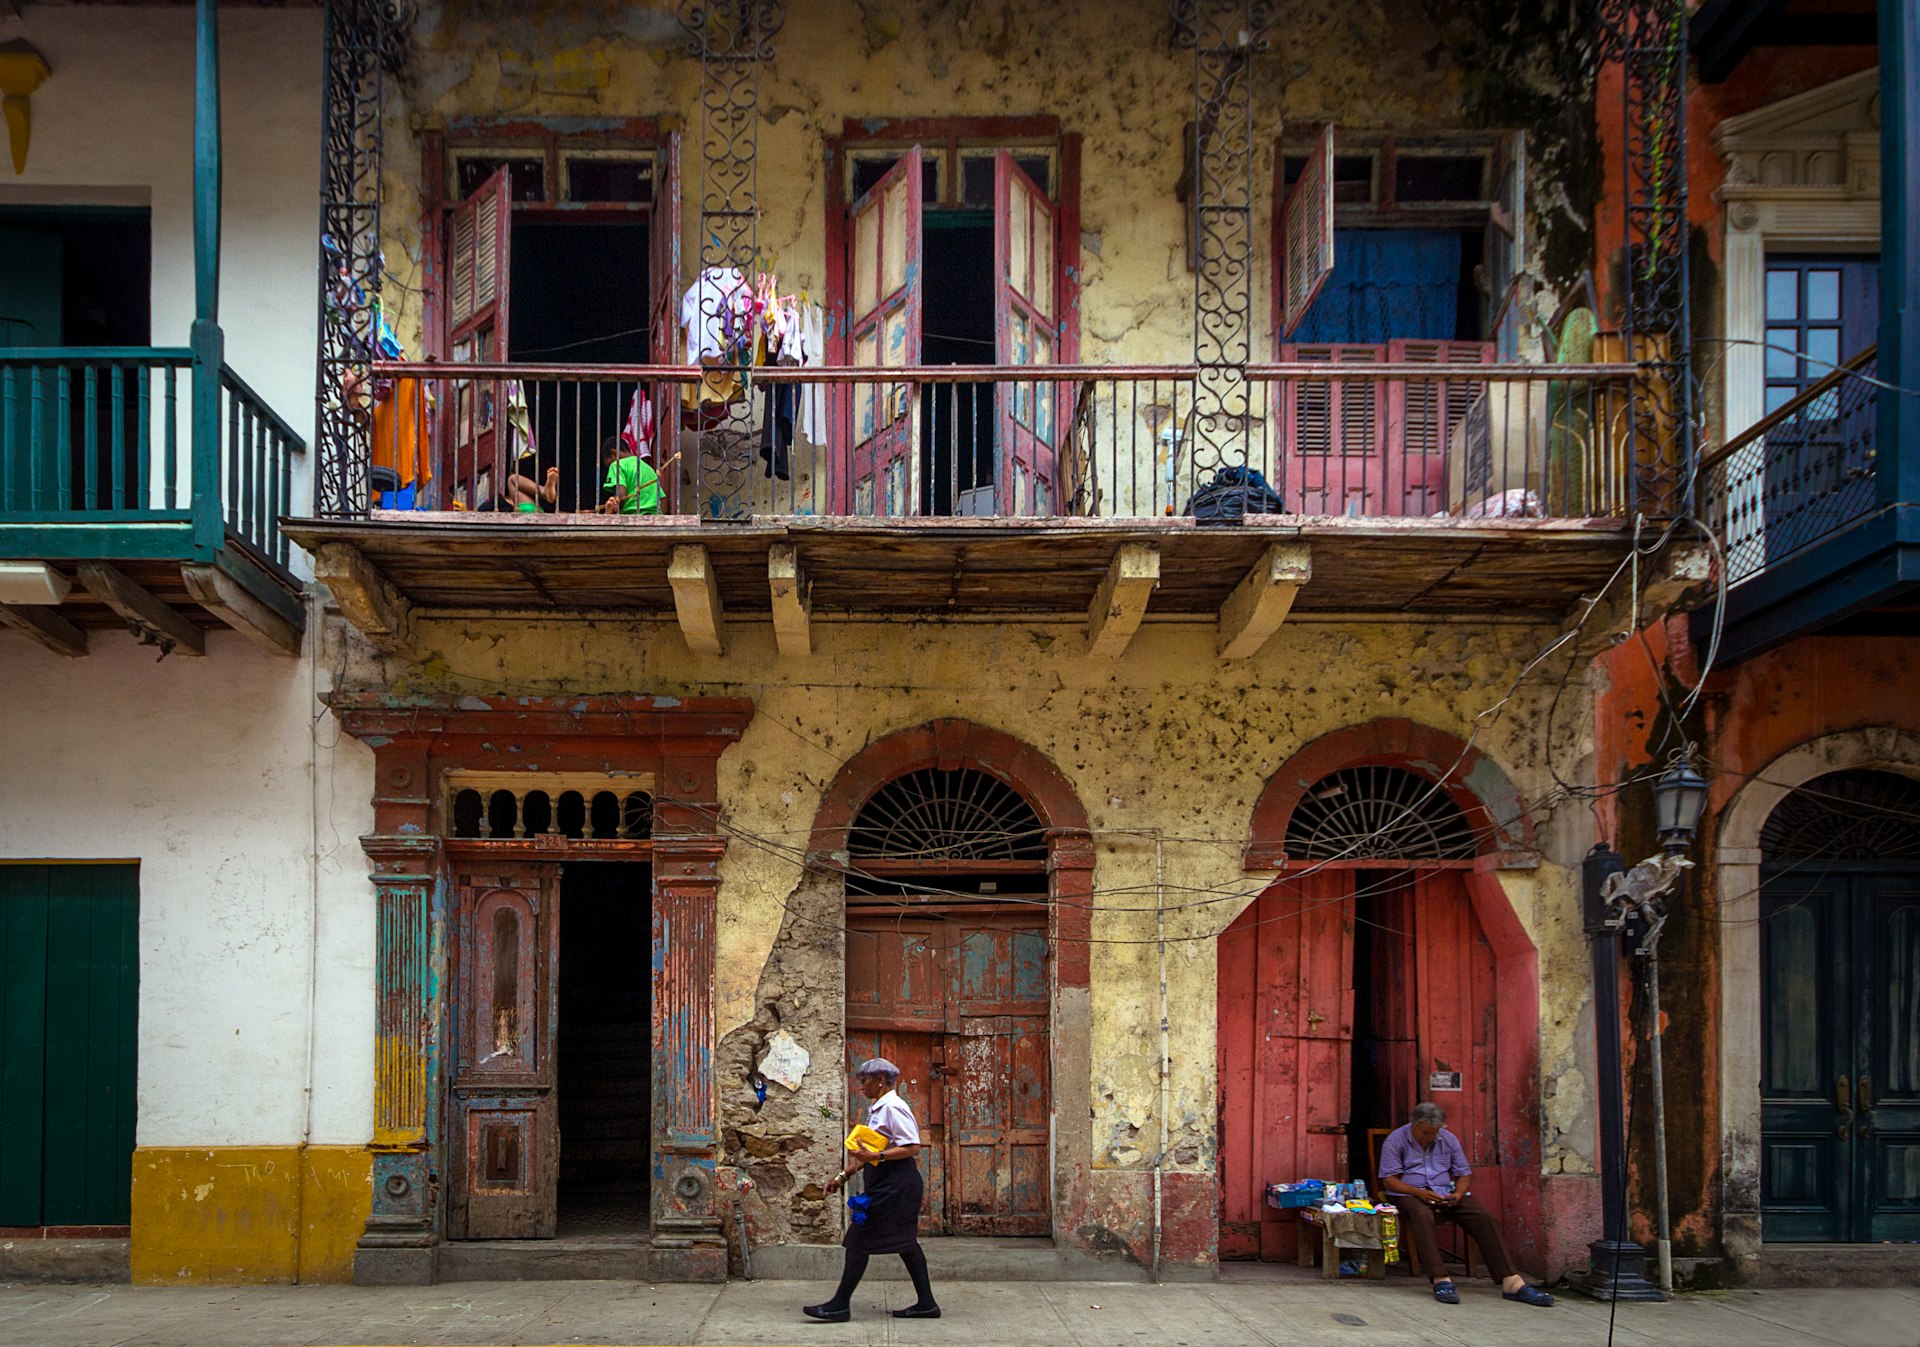 Woman walking the streets and a vendor sleeping, in historic Casco Viejo district of Panama City, Panama. 